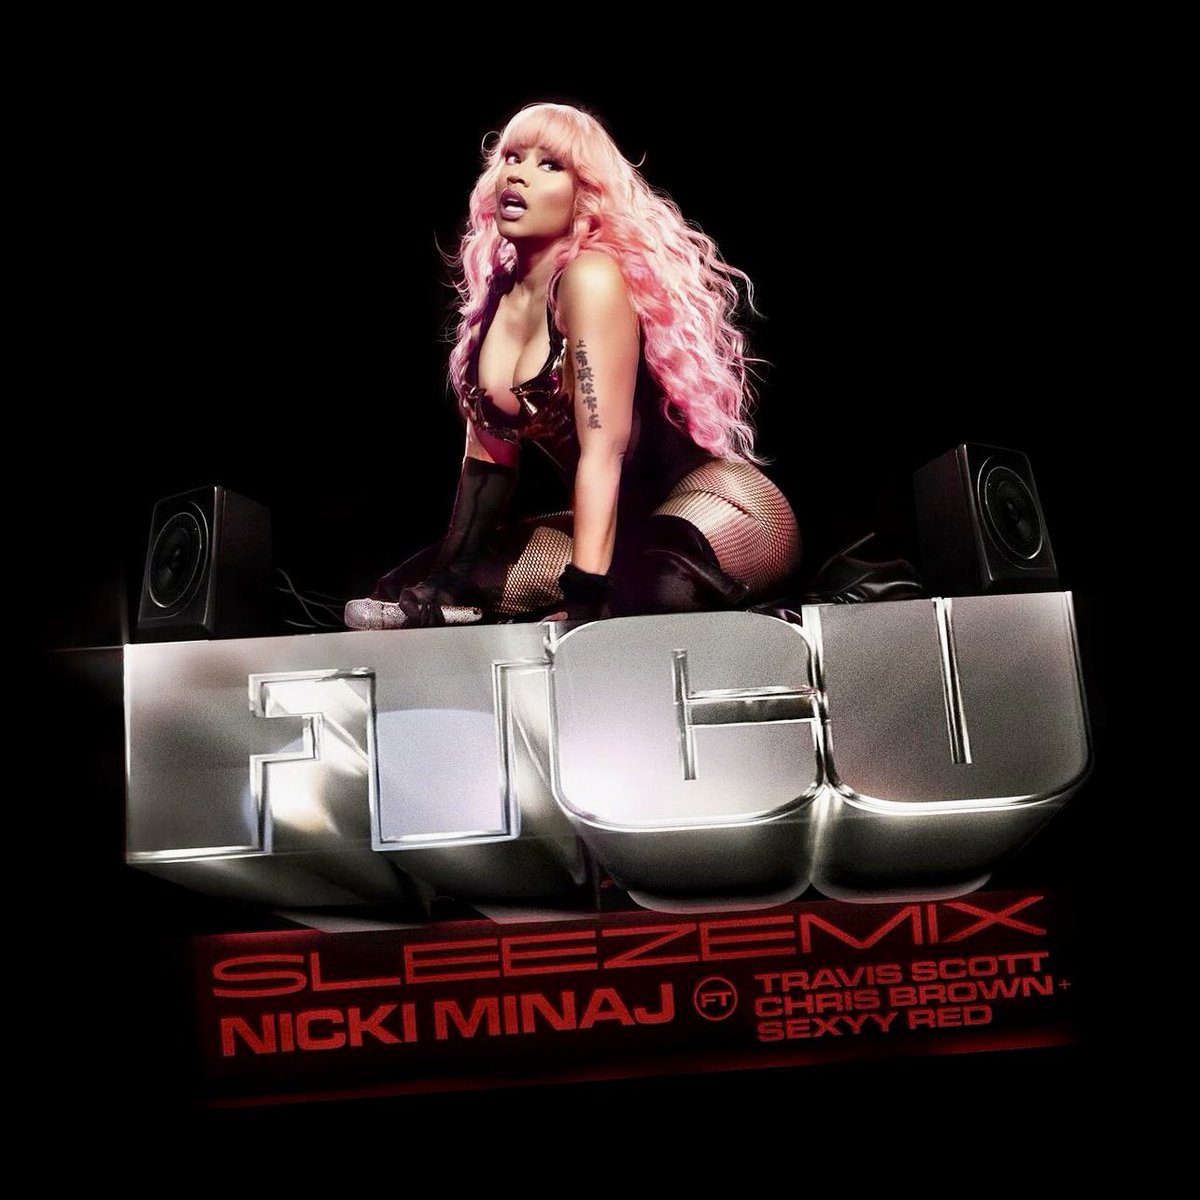 .@NICKIMINAJ is now the cover of the 2nd biggest playlist on Spotify 'RapCaviar' with FTCU (Sleeze Mix) at #5.